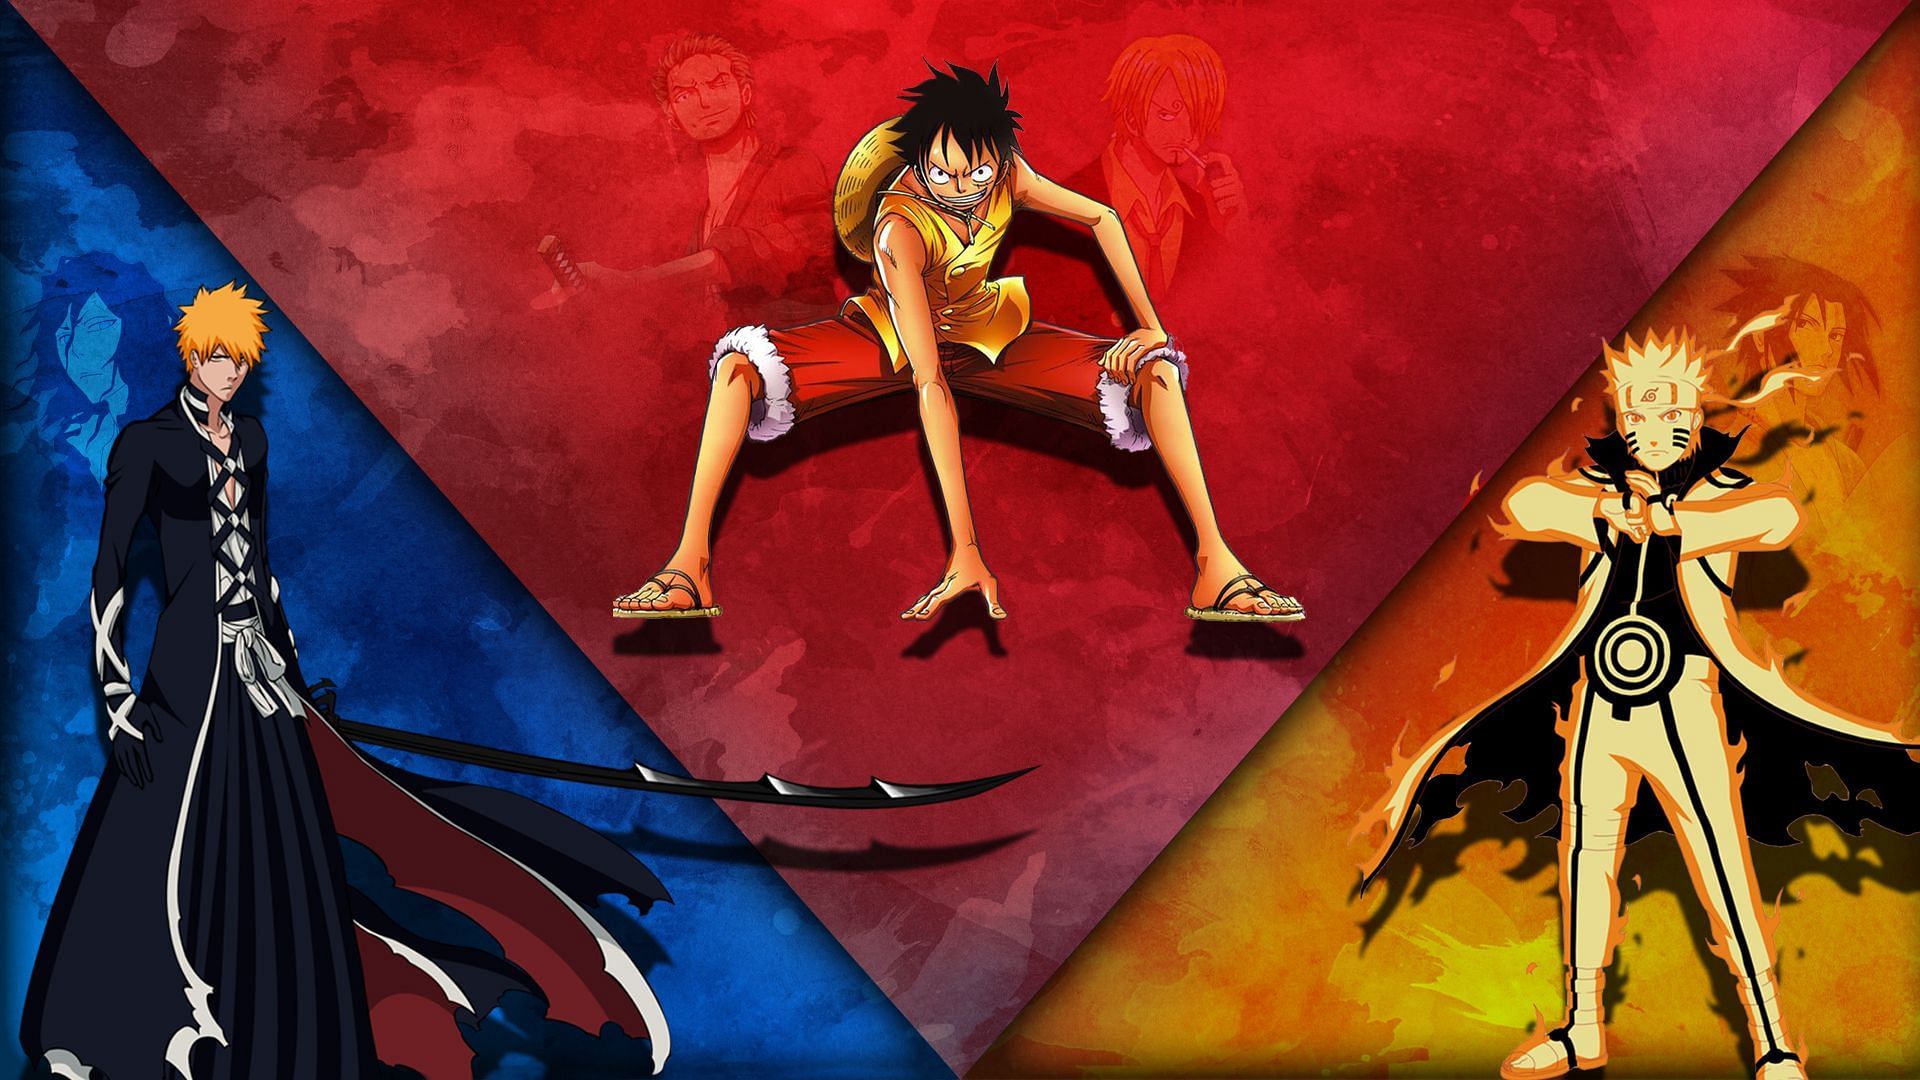 Fanart of the protagonists of each of the Big 3 series, featuring (left to right) Ichigo from Bleach, Luffy from One Piece, and Naruto from Naruto/Naruto Shippuden (Image via deviantart.com)